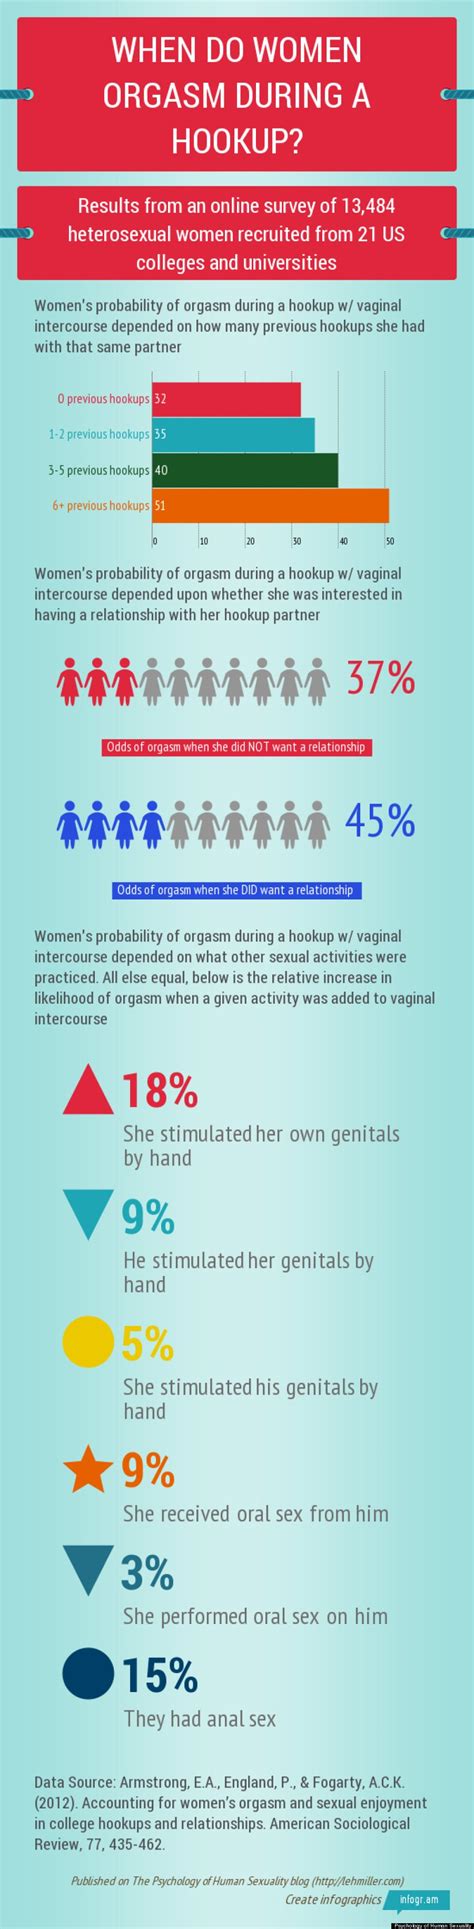 What Everyone Should Know About The Female Orgasm And Hooking Up Infographic Huffpost